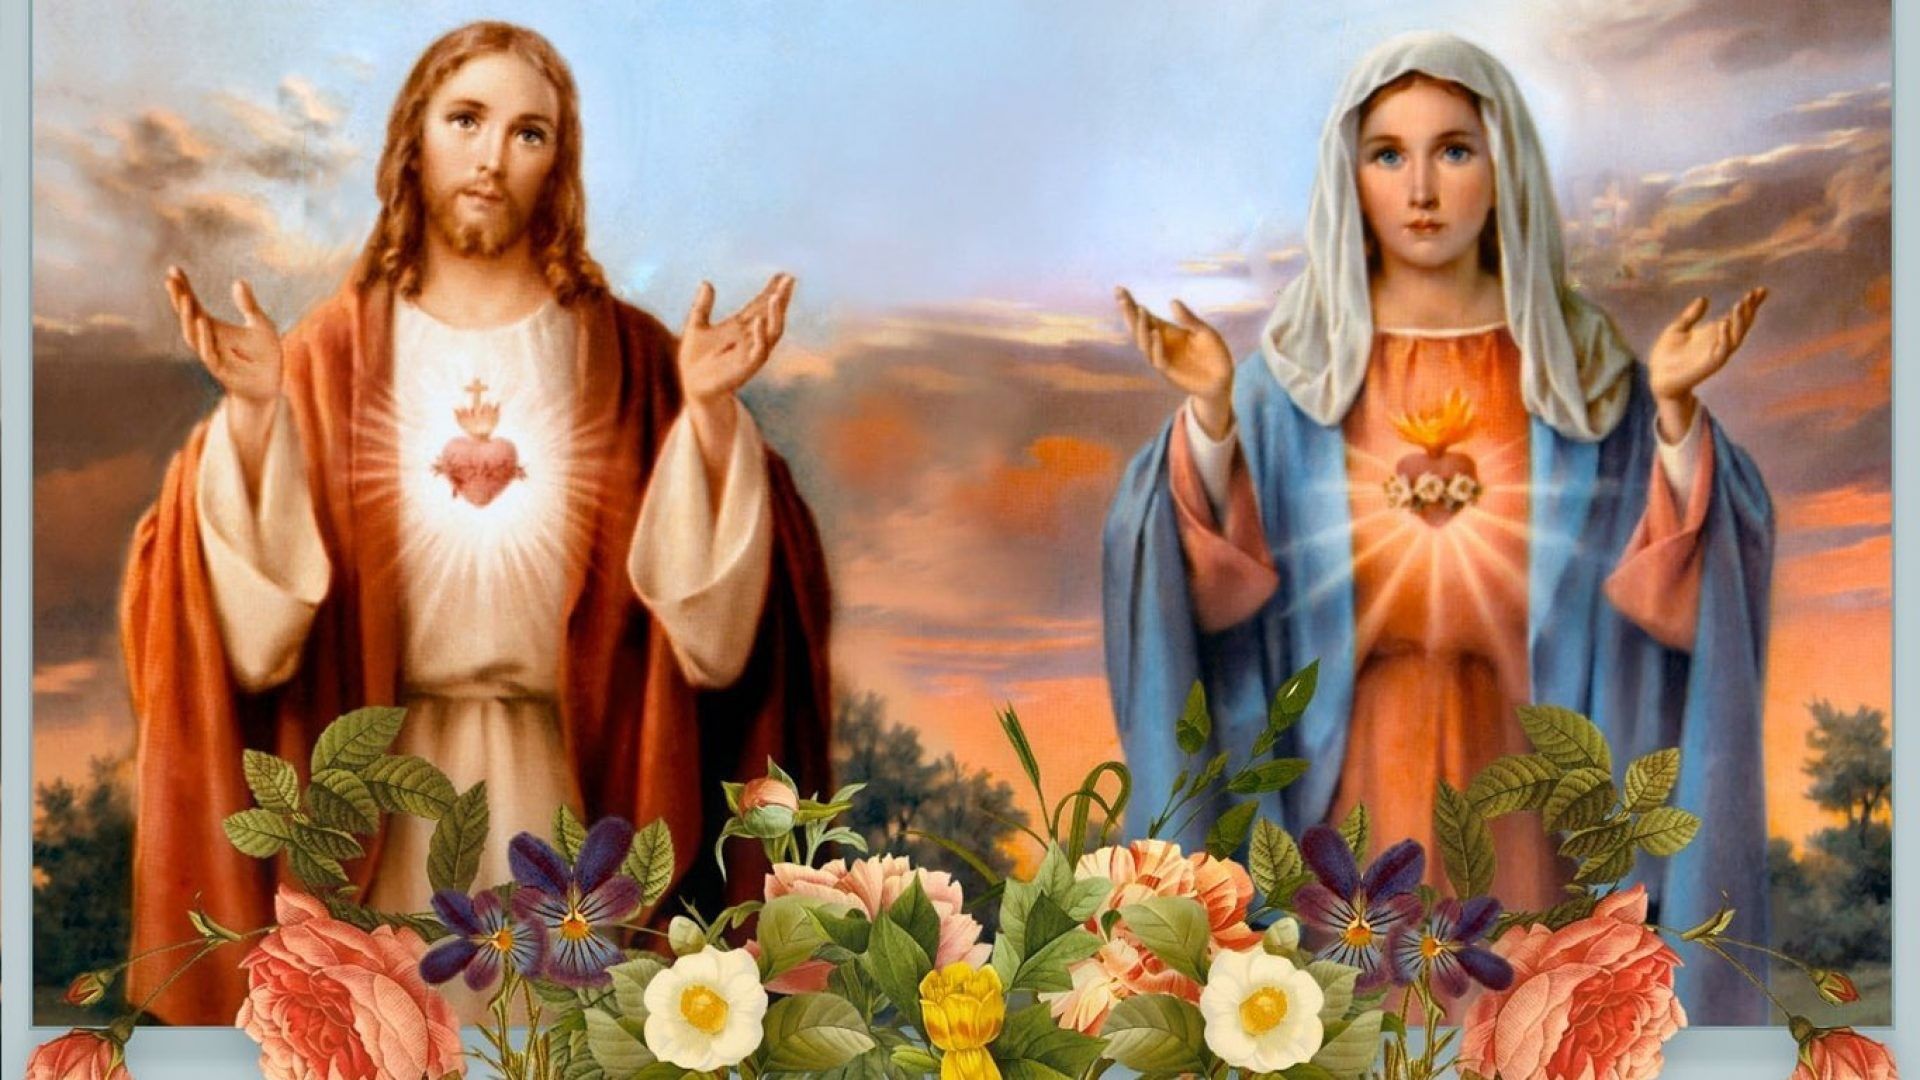 Download Wallpaper Data Src Blessed Virgin Mary Wallpaper And Mary